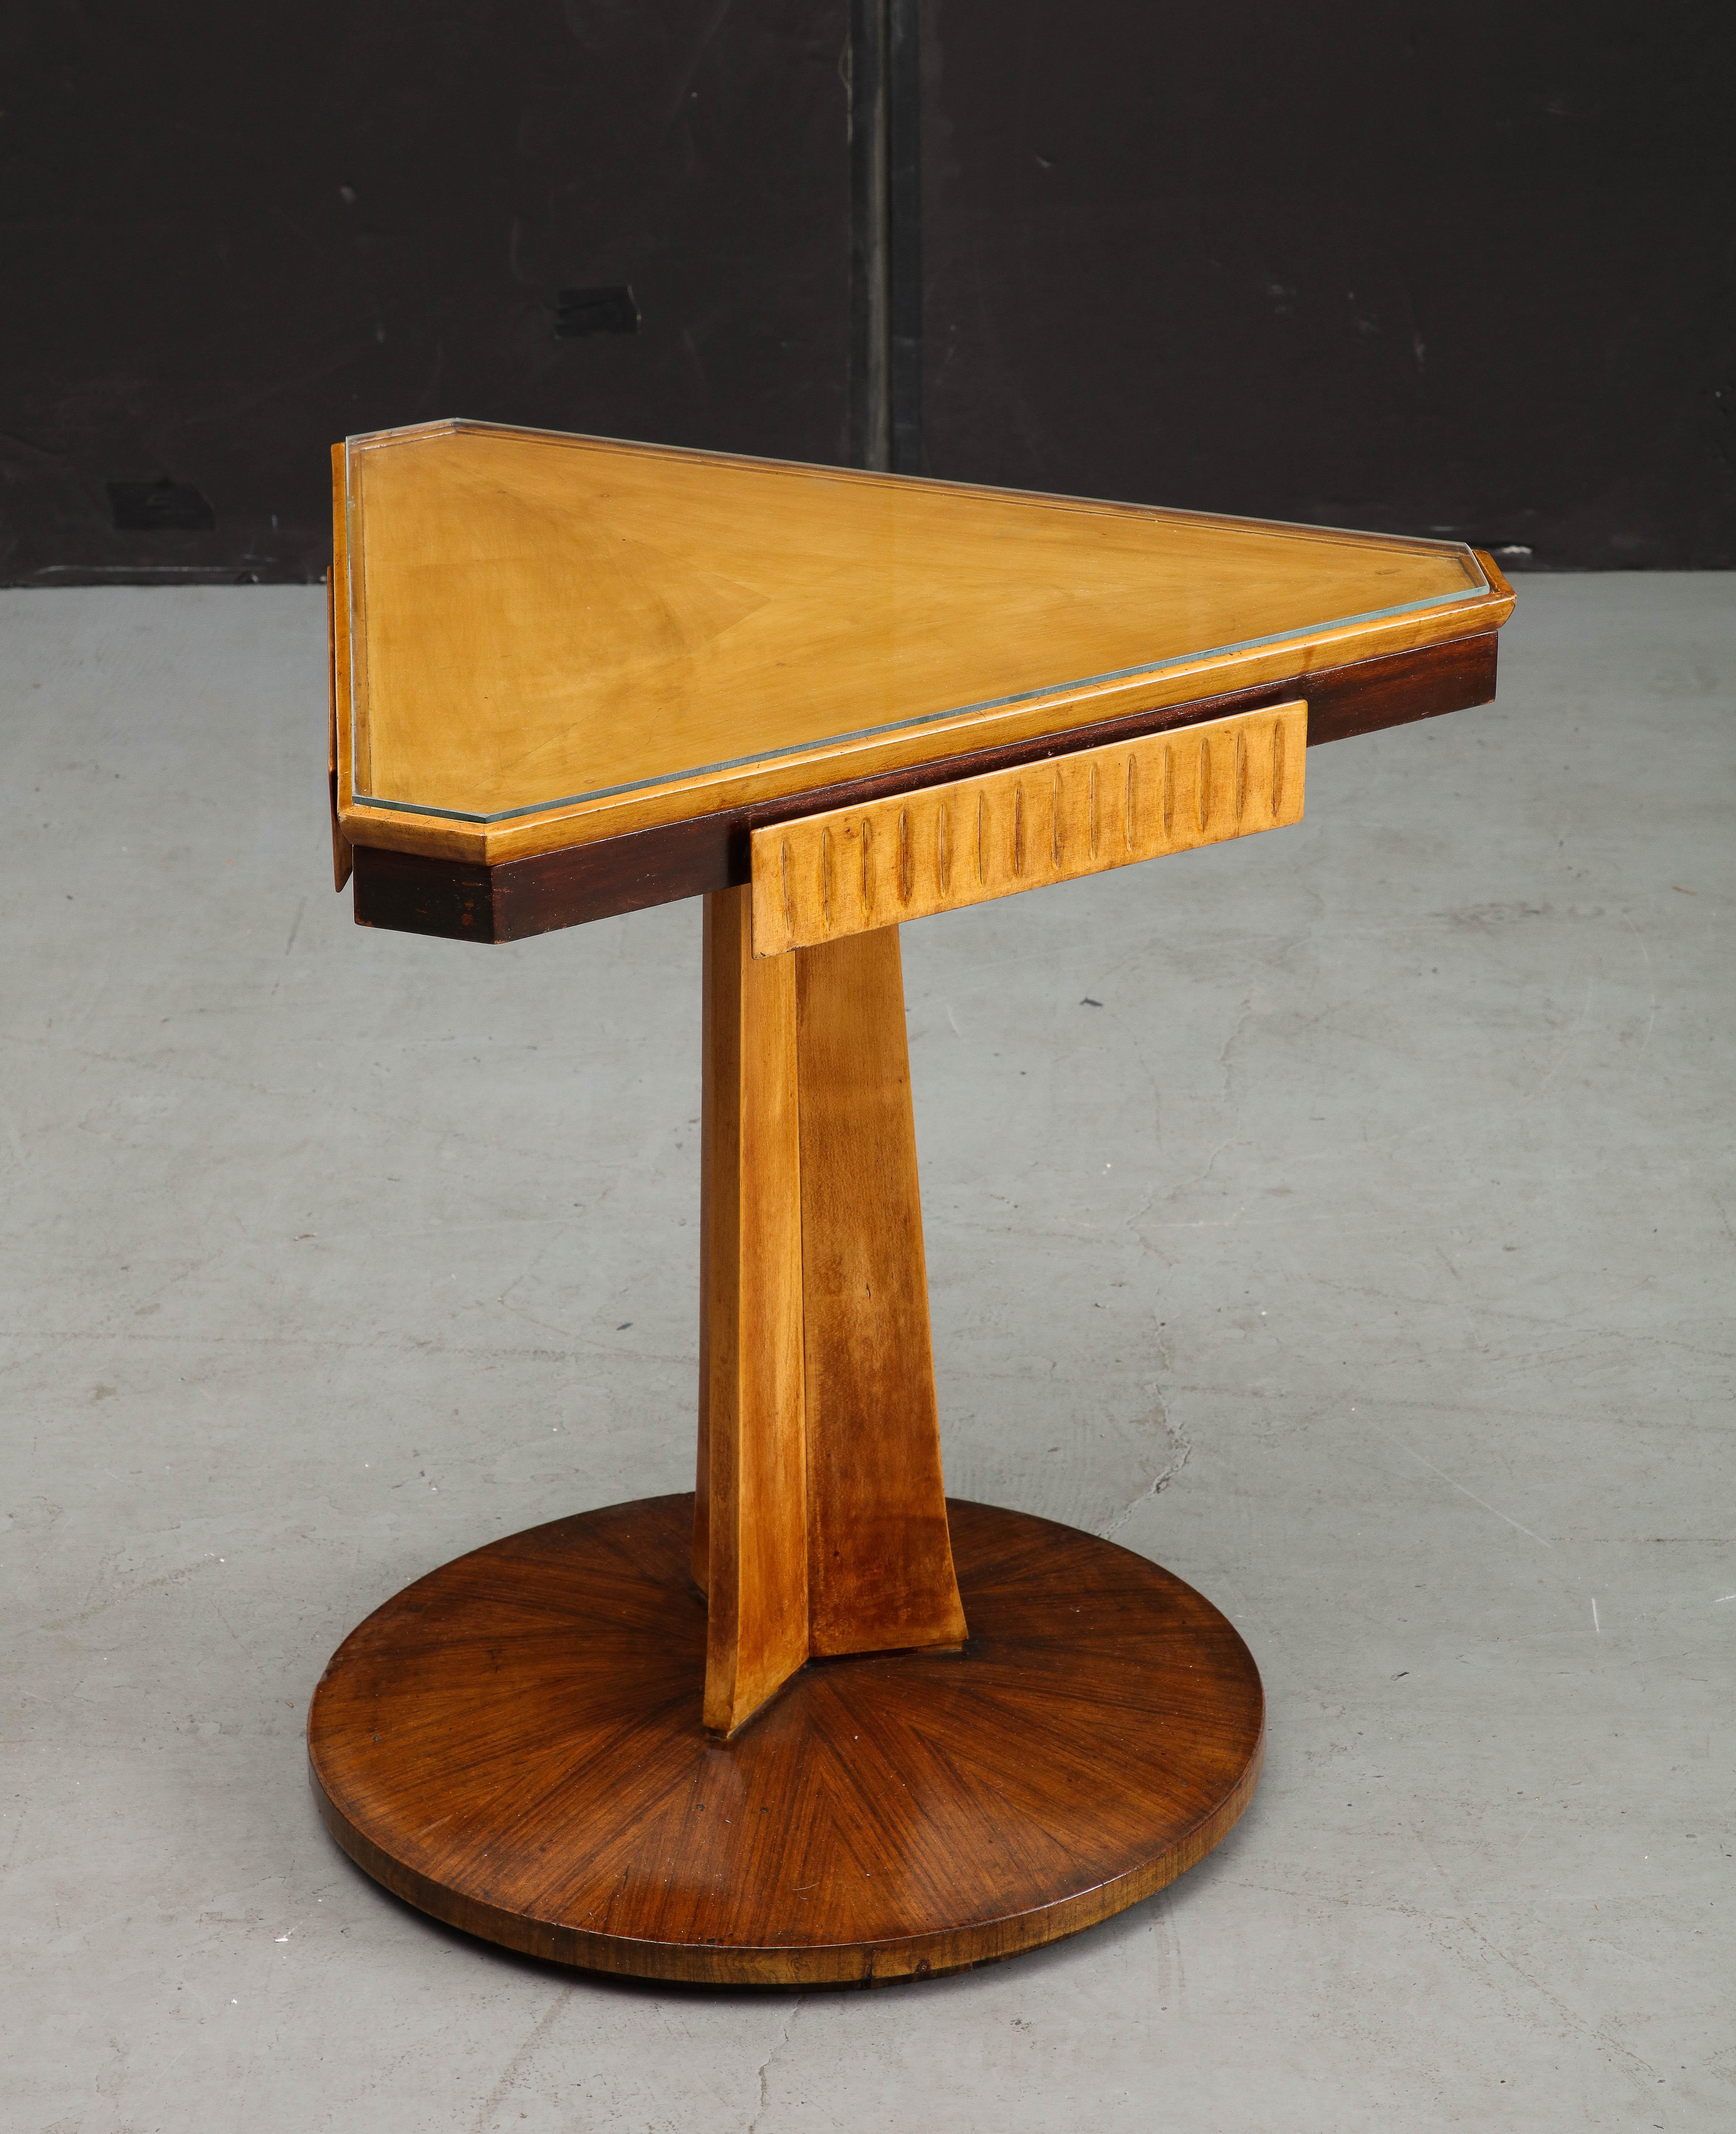 Midcentury Italian Triangular Fruitwood Side Table with Glass Top For Sale 1